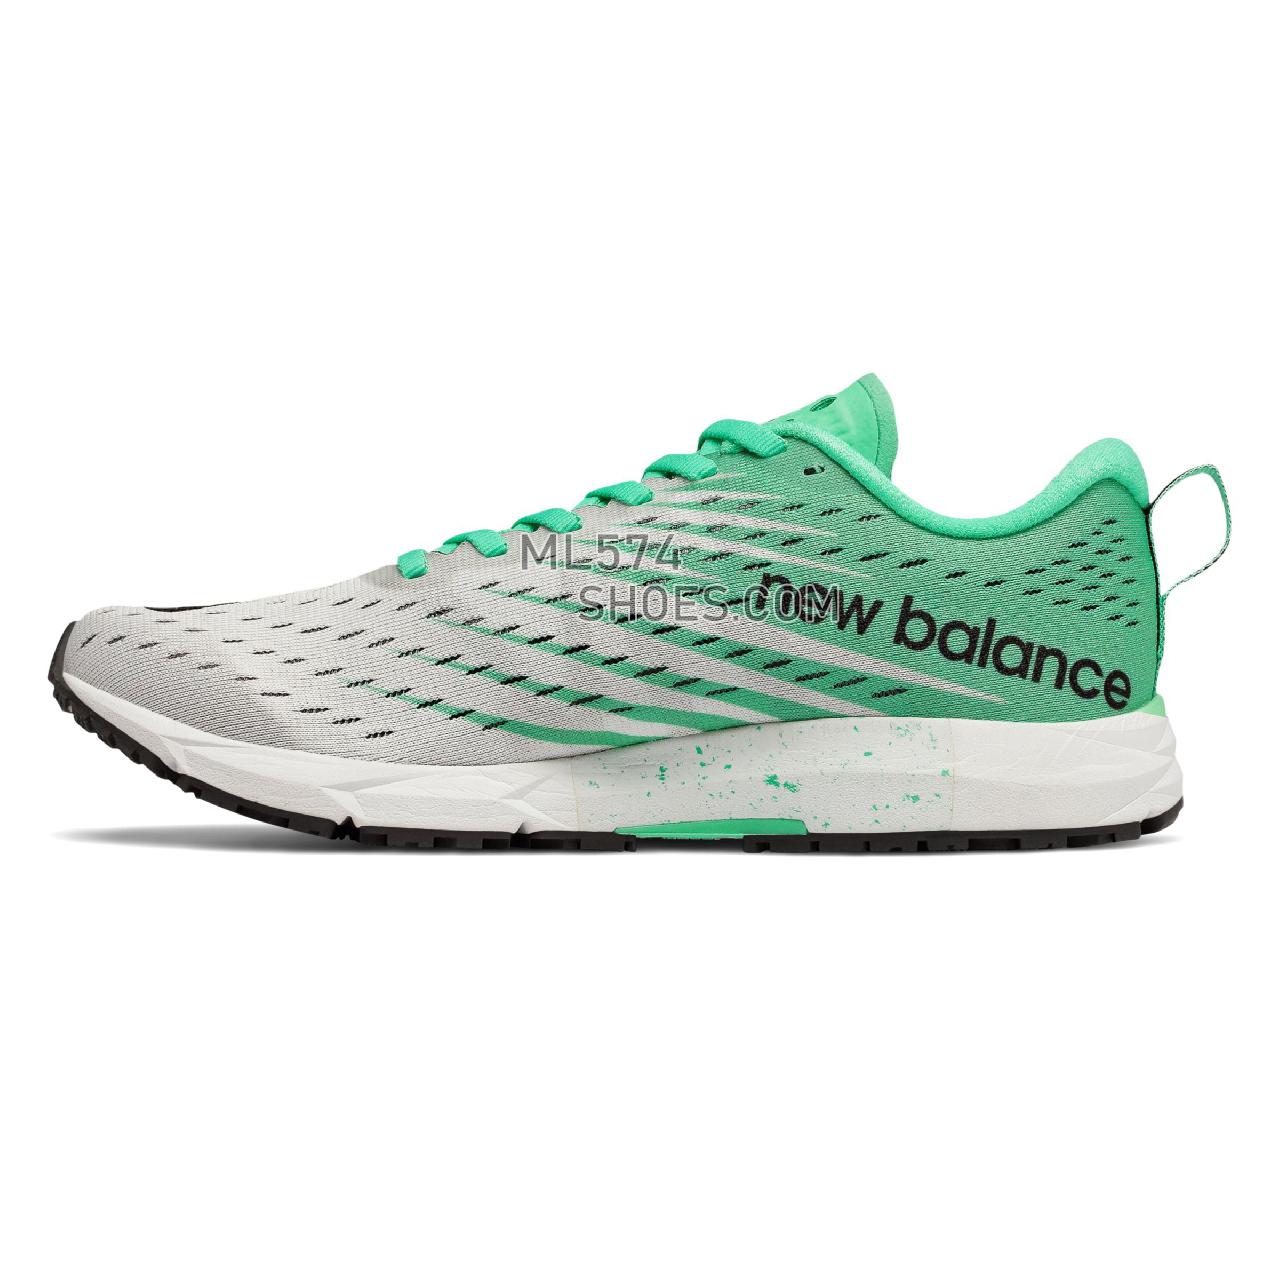 New Balance 1500v5 - Women's Track Spikes And Cross Country - White with Neon Emerald - W1500WG5